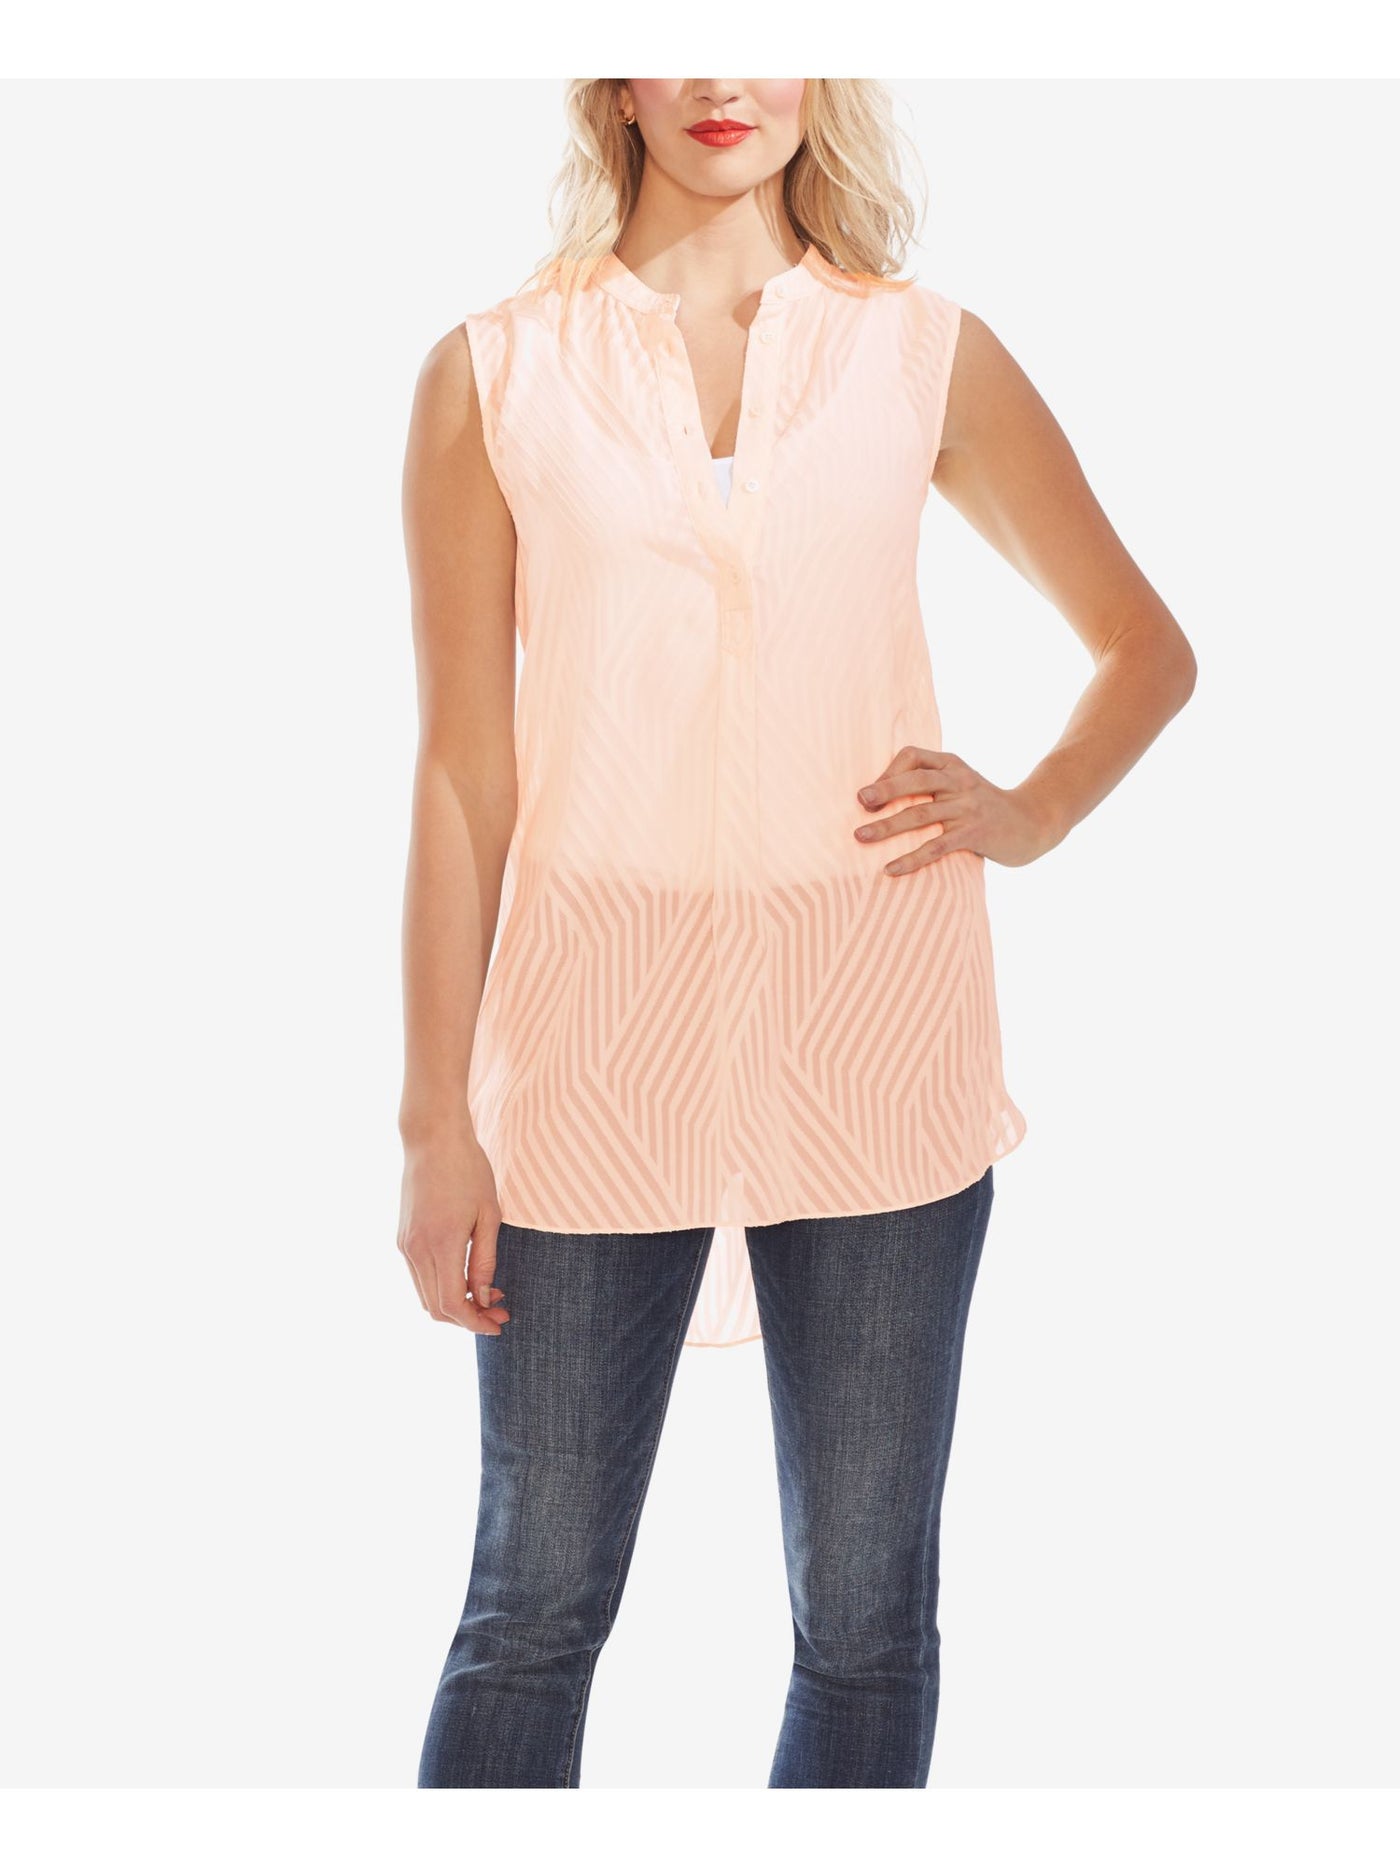 VINCE CAMUTO Womens Pink Sheer Sleeveless Blouse Size: XXS